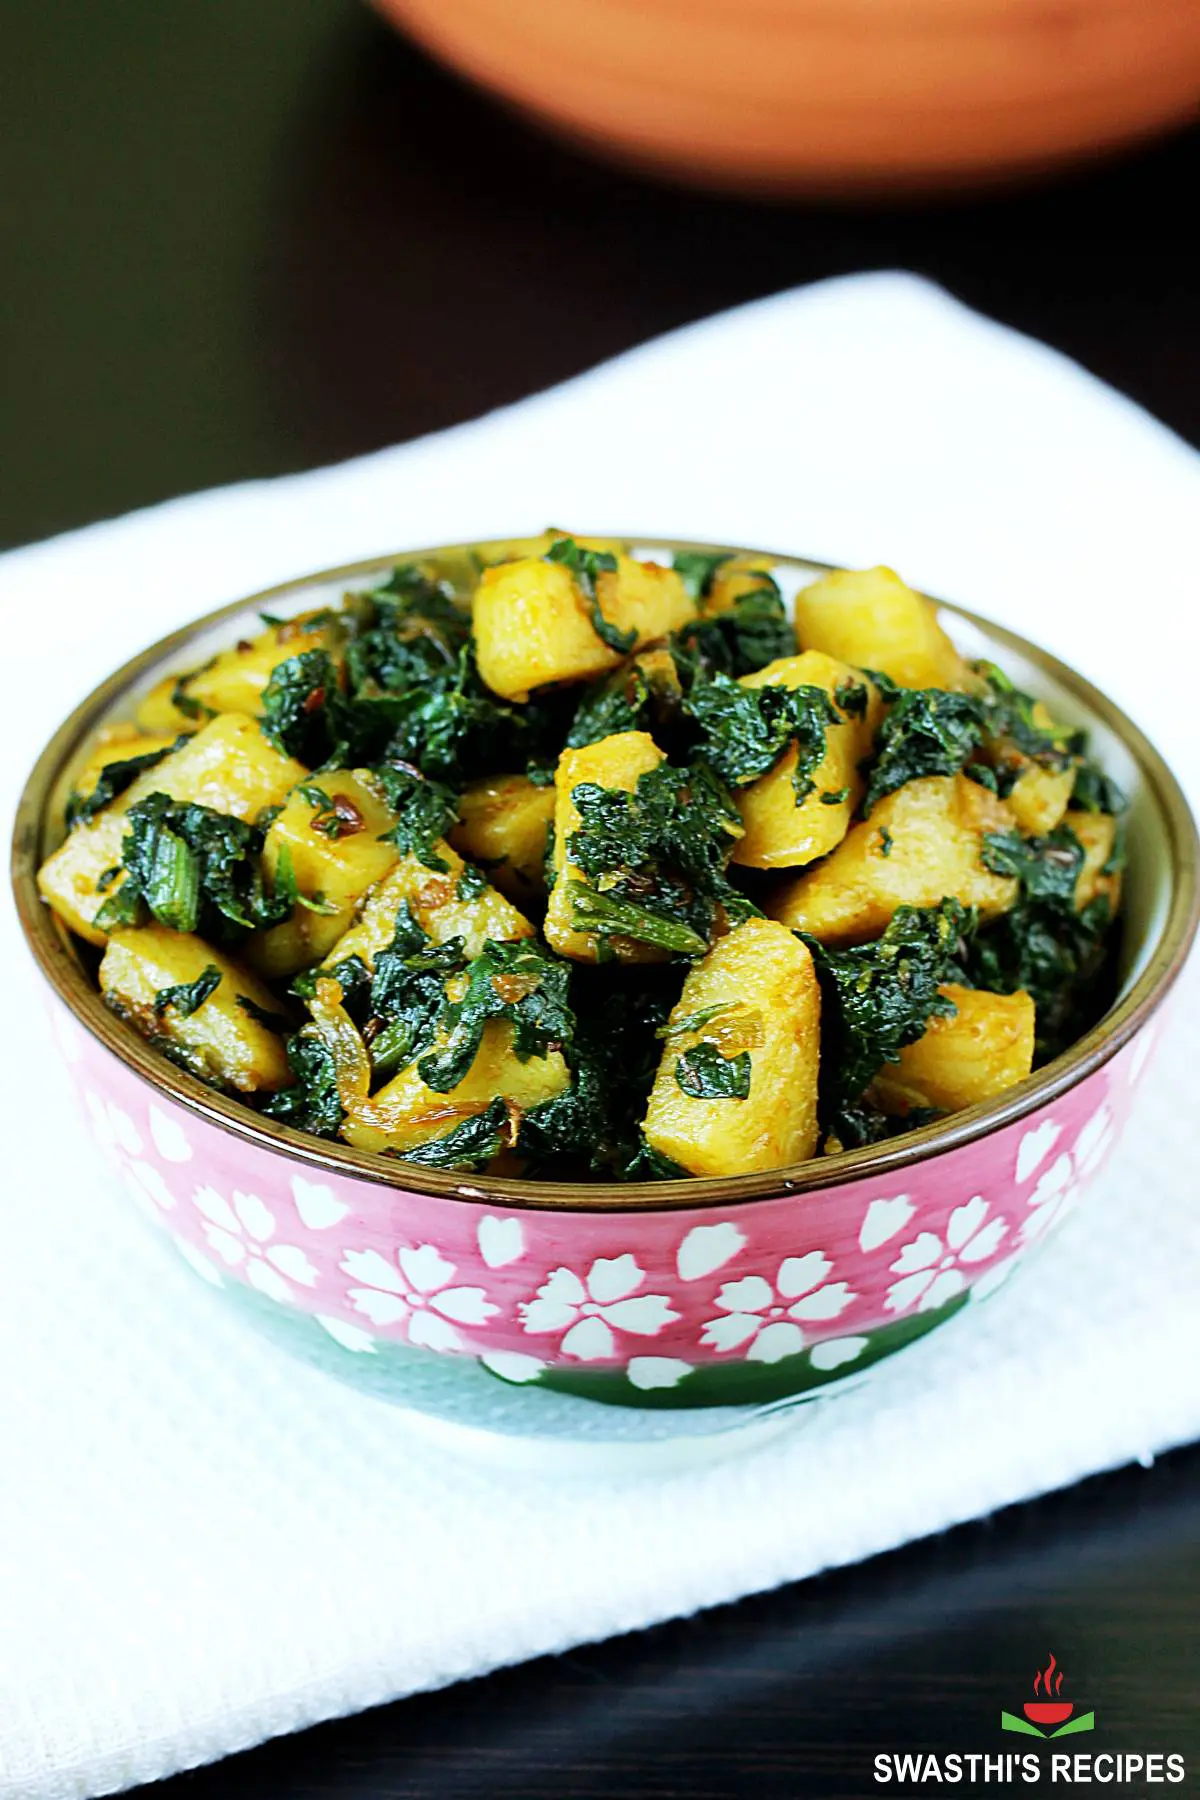 Aloo palak made with potatoes and spinach